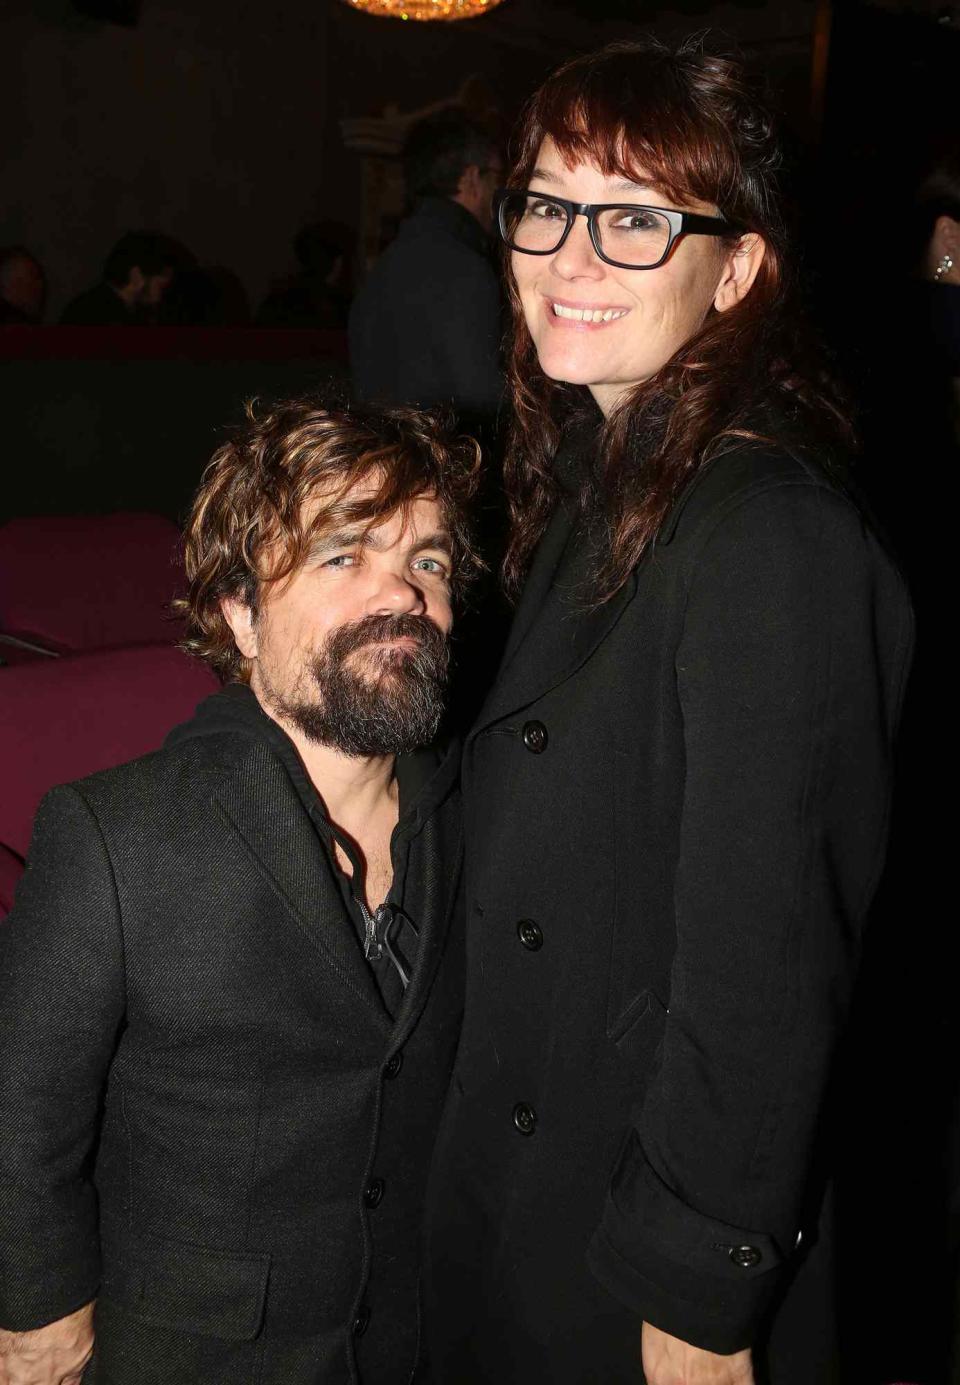 Peter Dinklage and Erica Schmidt pose at The Opening Night Arrivals for "Misery" on Broadway at The Broadhurst Theatre on November 15, 2015 in New York City